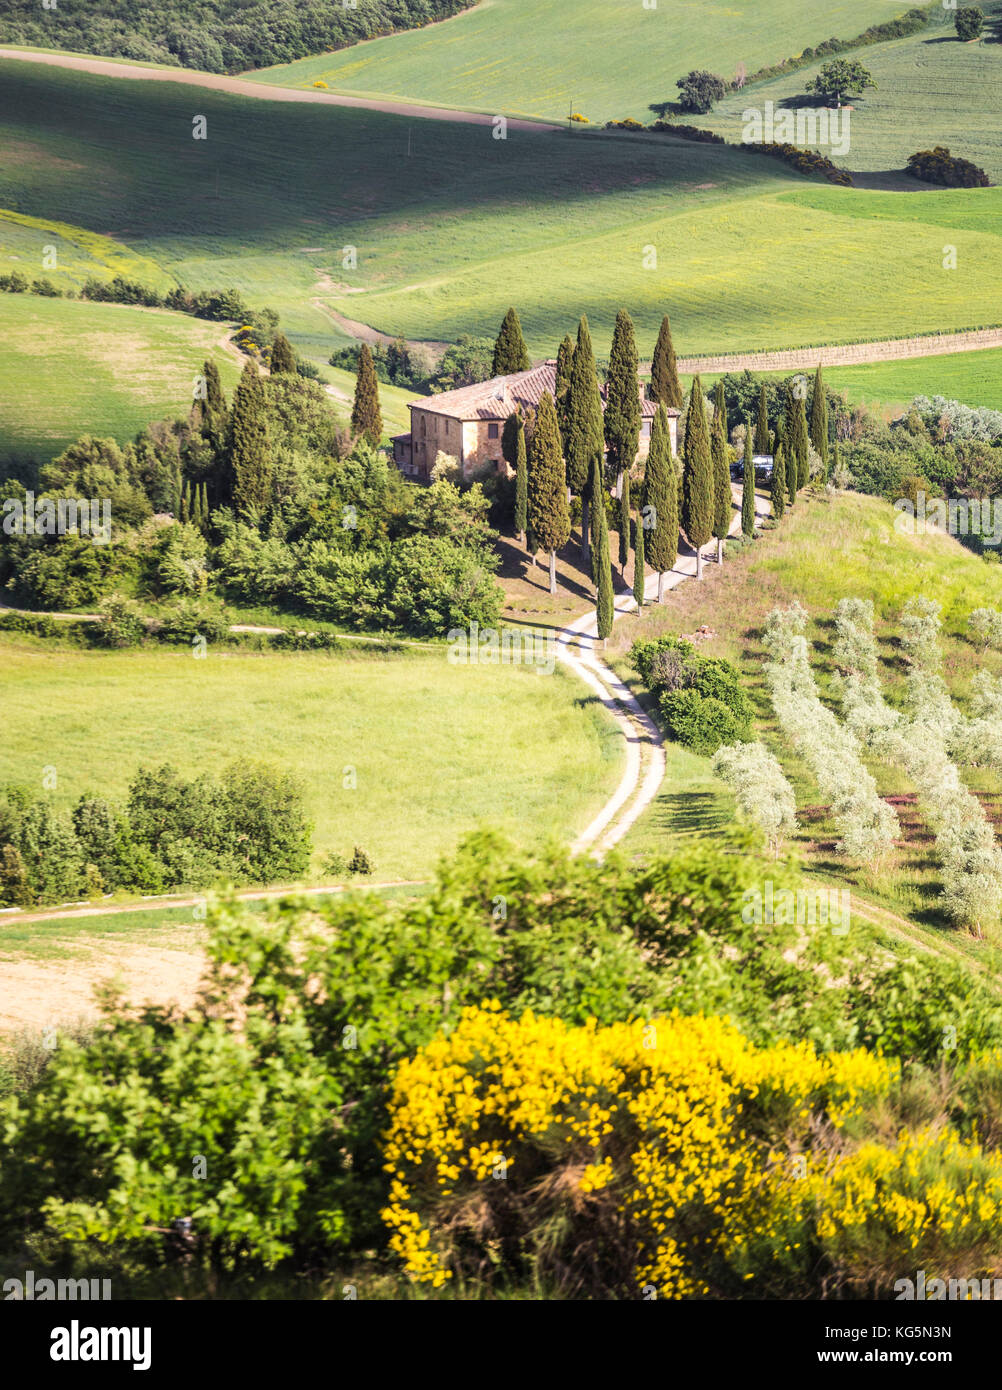 The famous Podere Belvedere under the sunlight, with green hills. Val d'Orcia, Province of Siena, Tuscany, Italy. Stock Photo